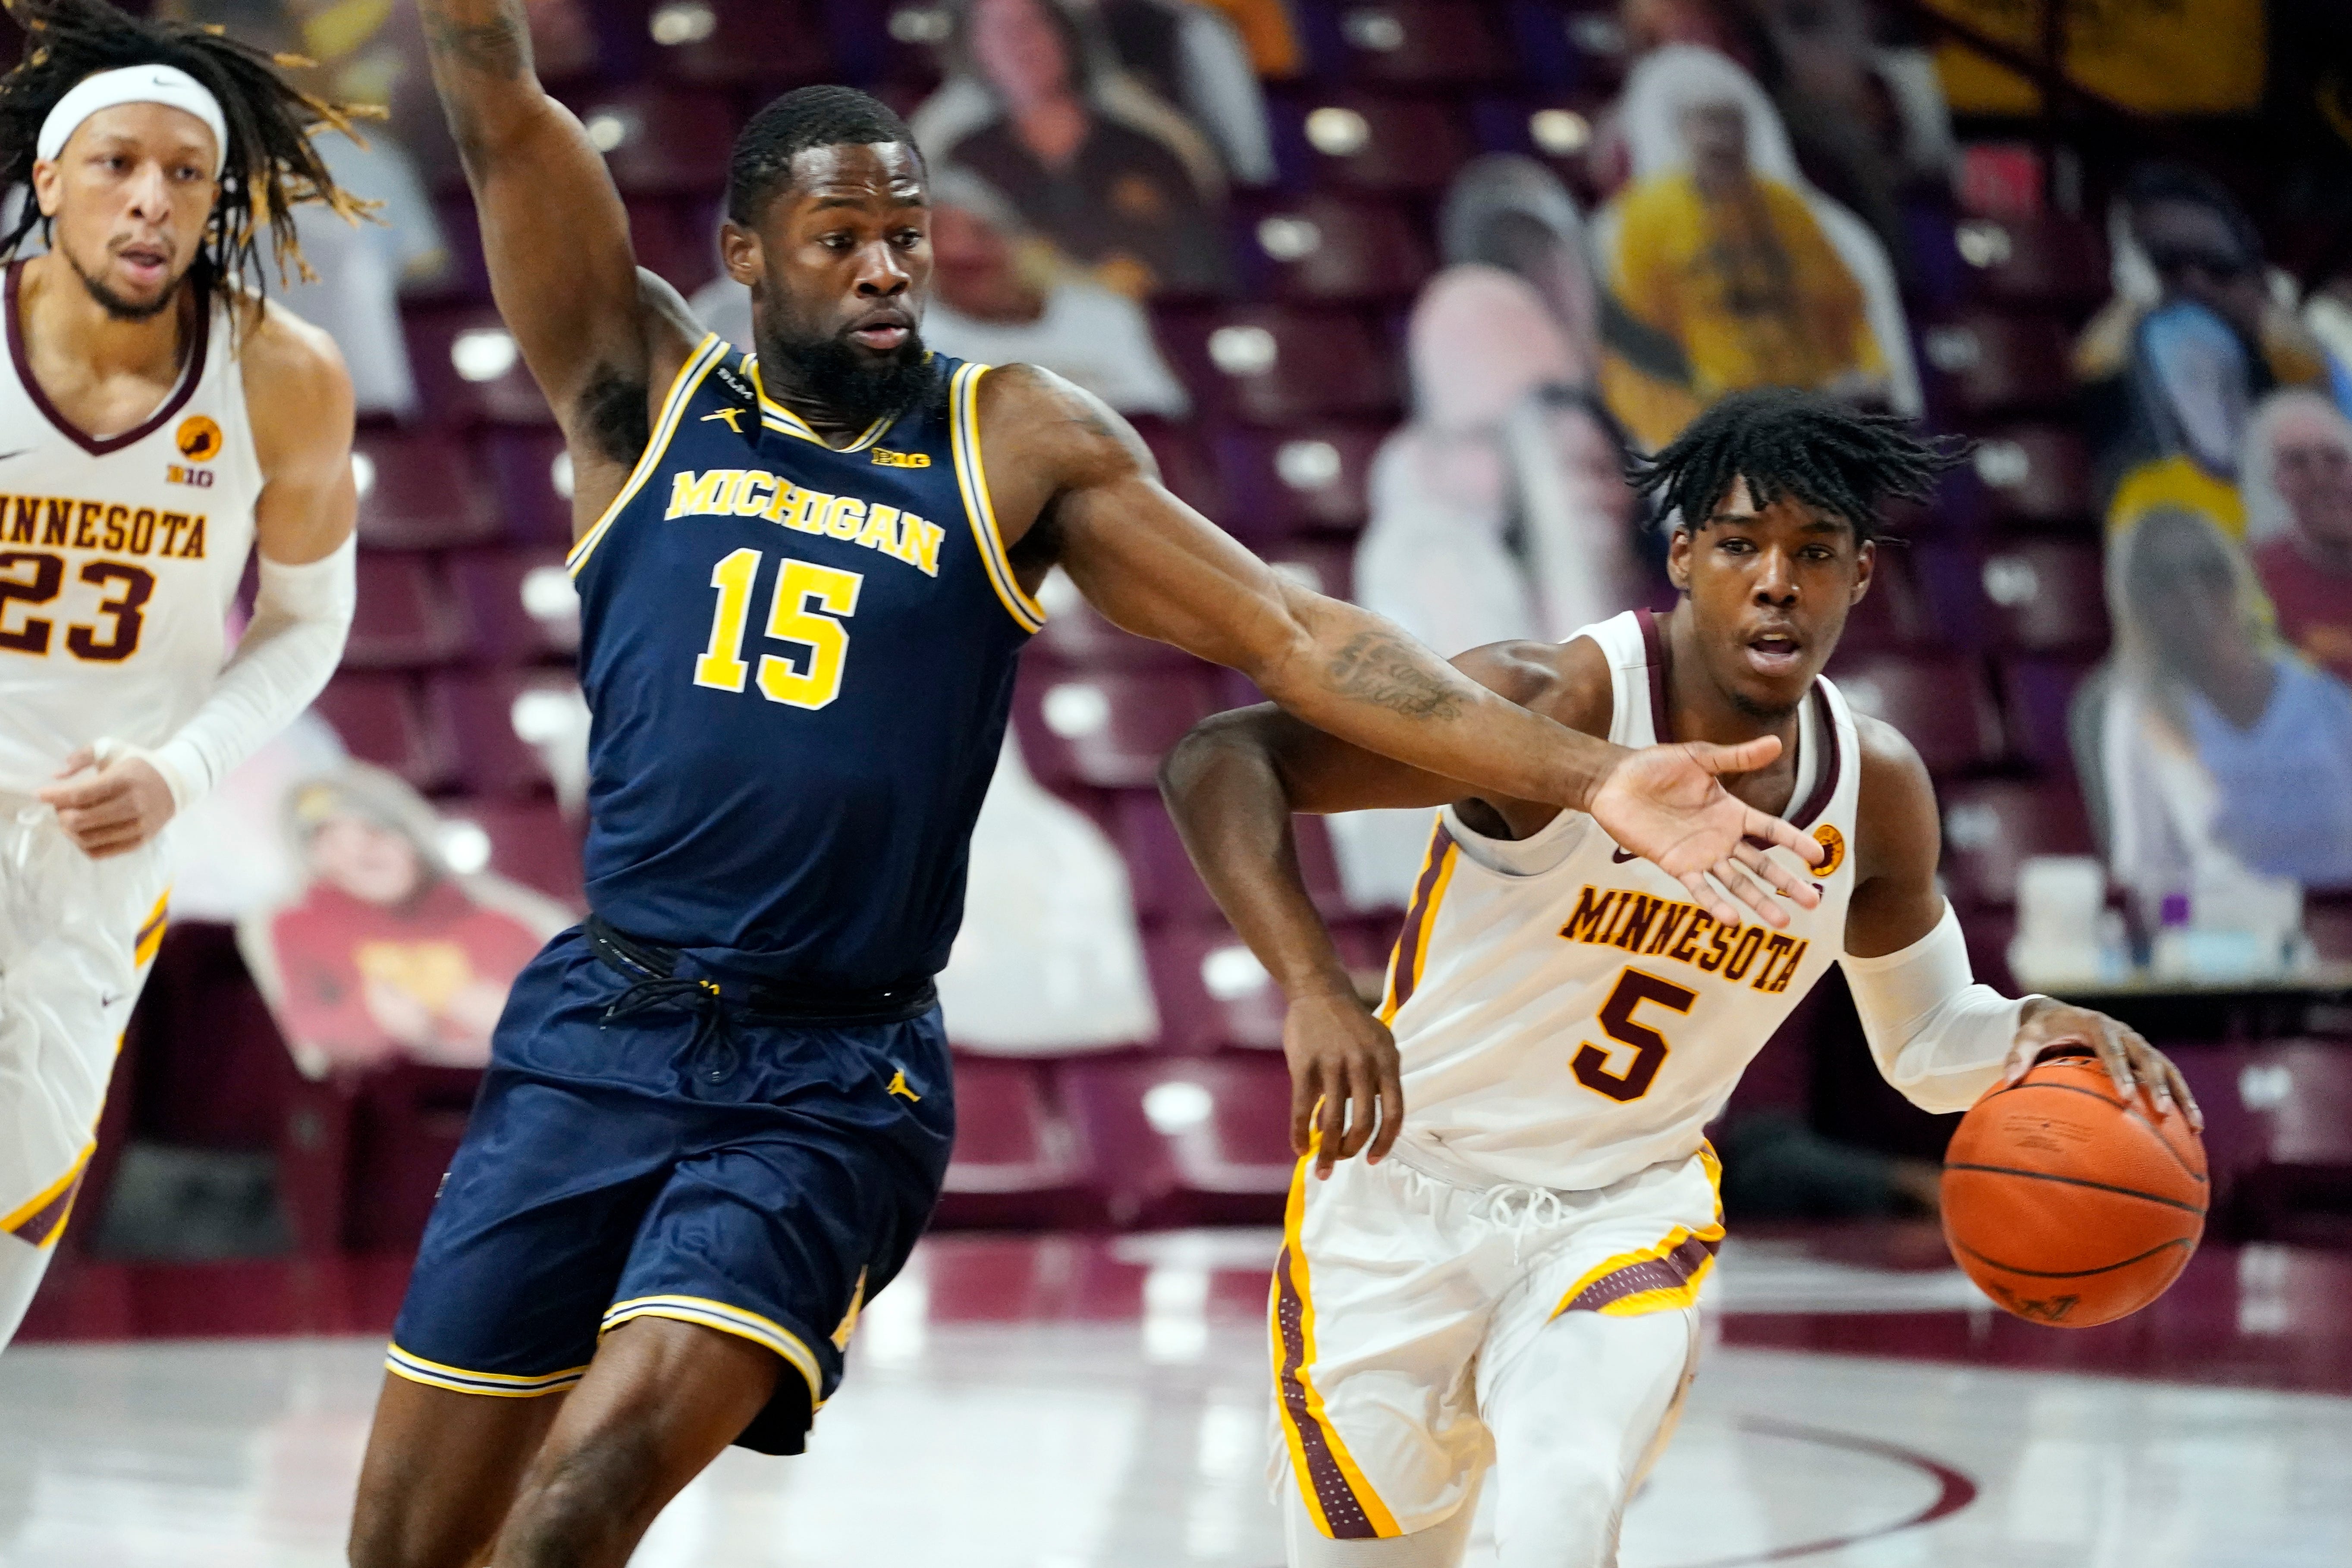 Michigan's Chaundee Brown (15) defends as Minnesota's Marcus Carr (5) drives the ball in the first half.